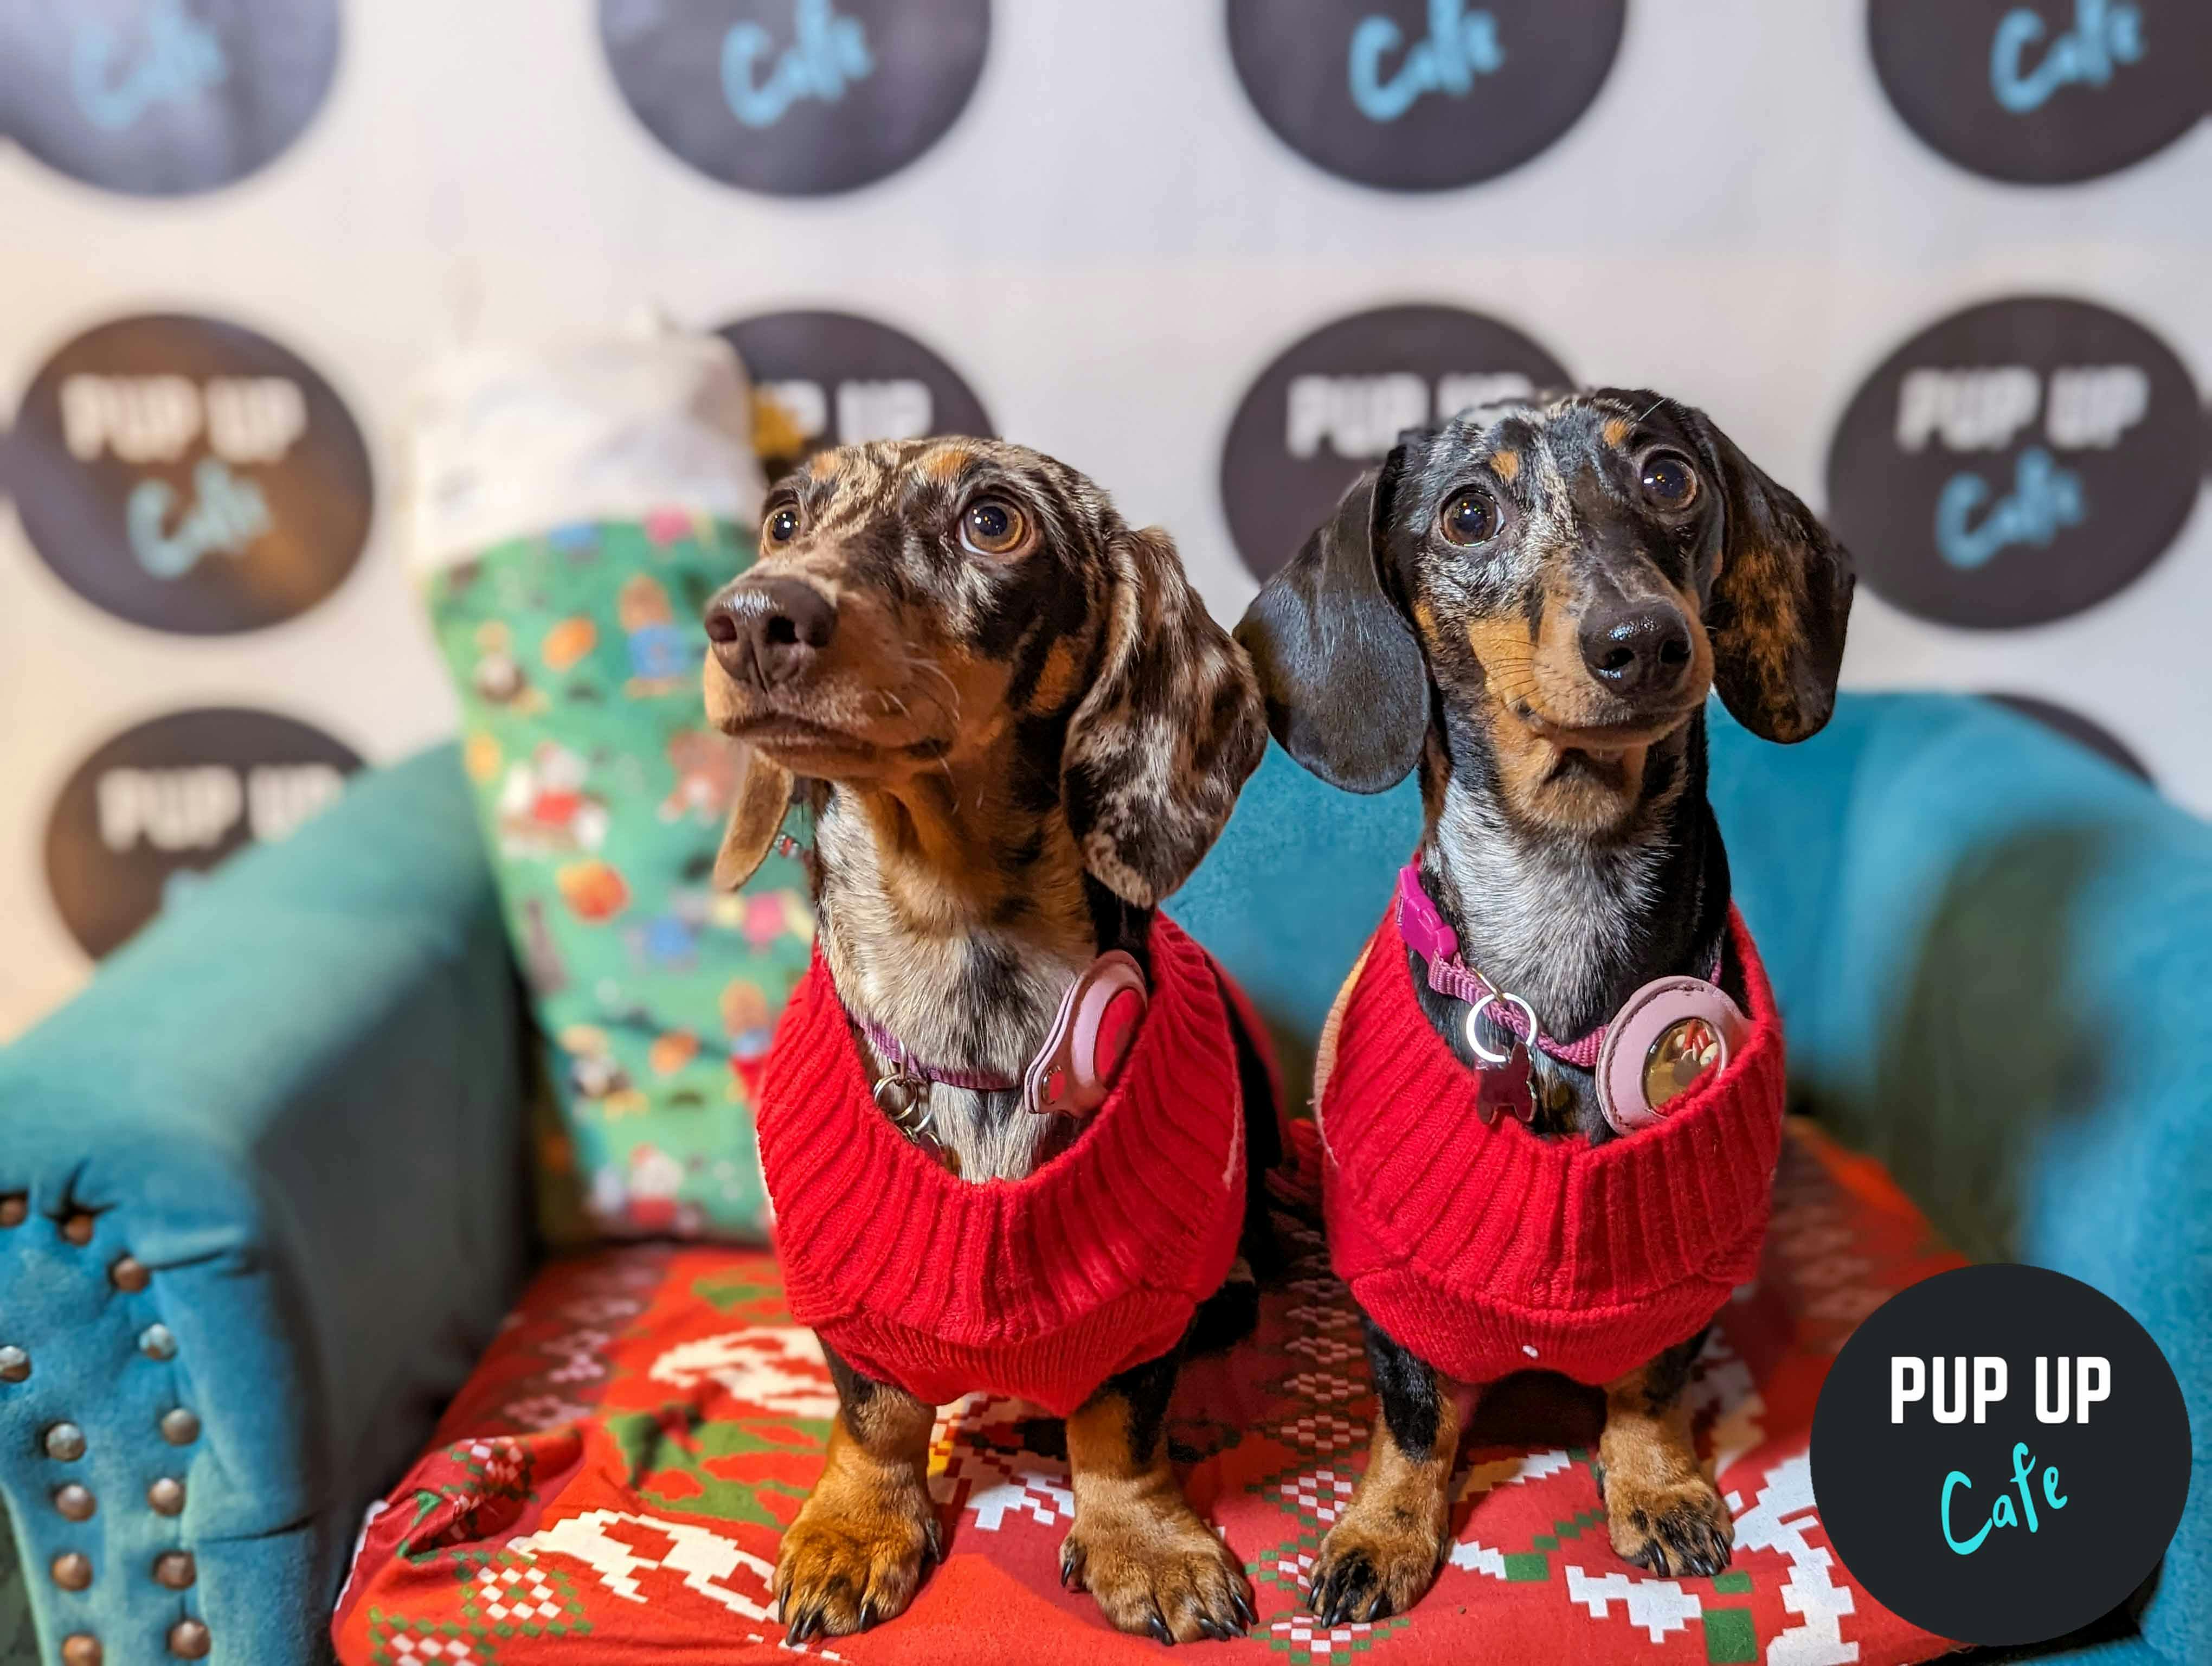 Sausages get festive at the Dashing Dachshund Christmas Tour in Leeds